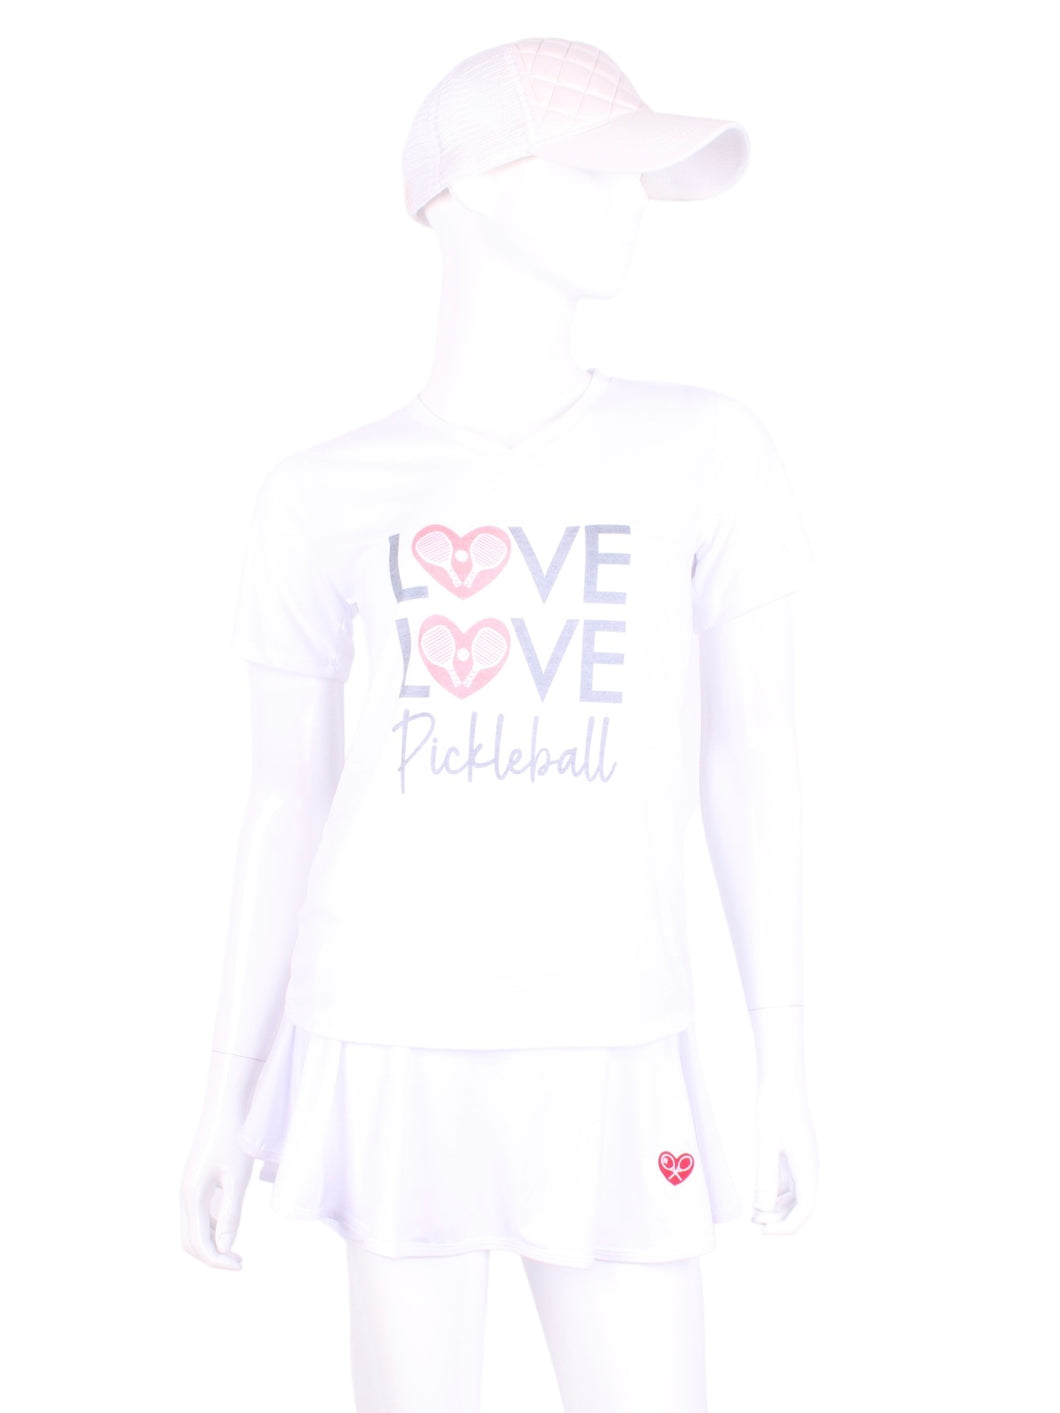 Super thin and soft V-Neck T-shirt with Love Love Tennis Print on both front and back.